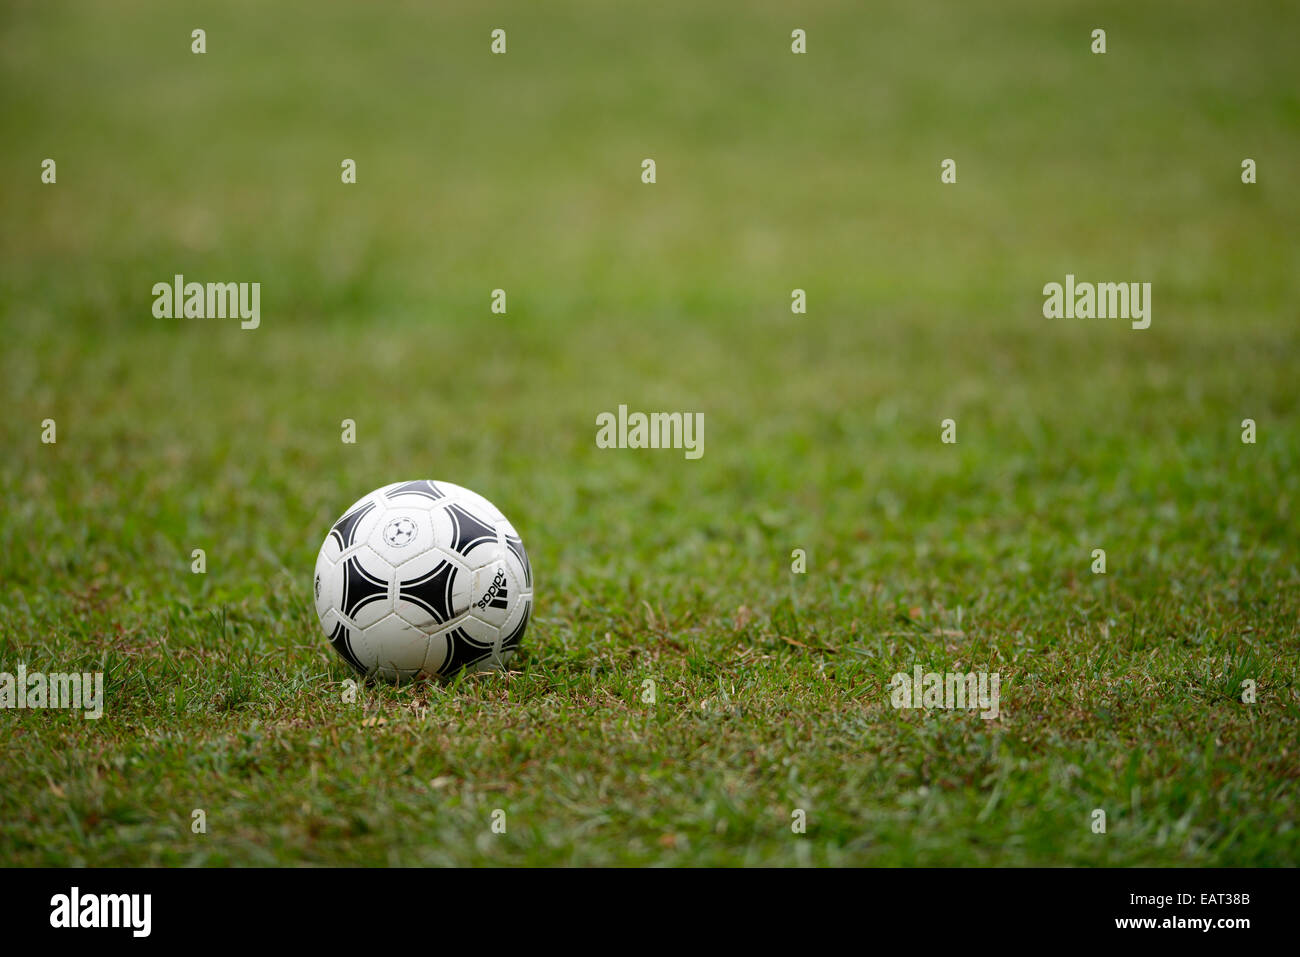 A football on a Green Field Stock Photo